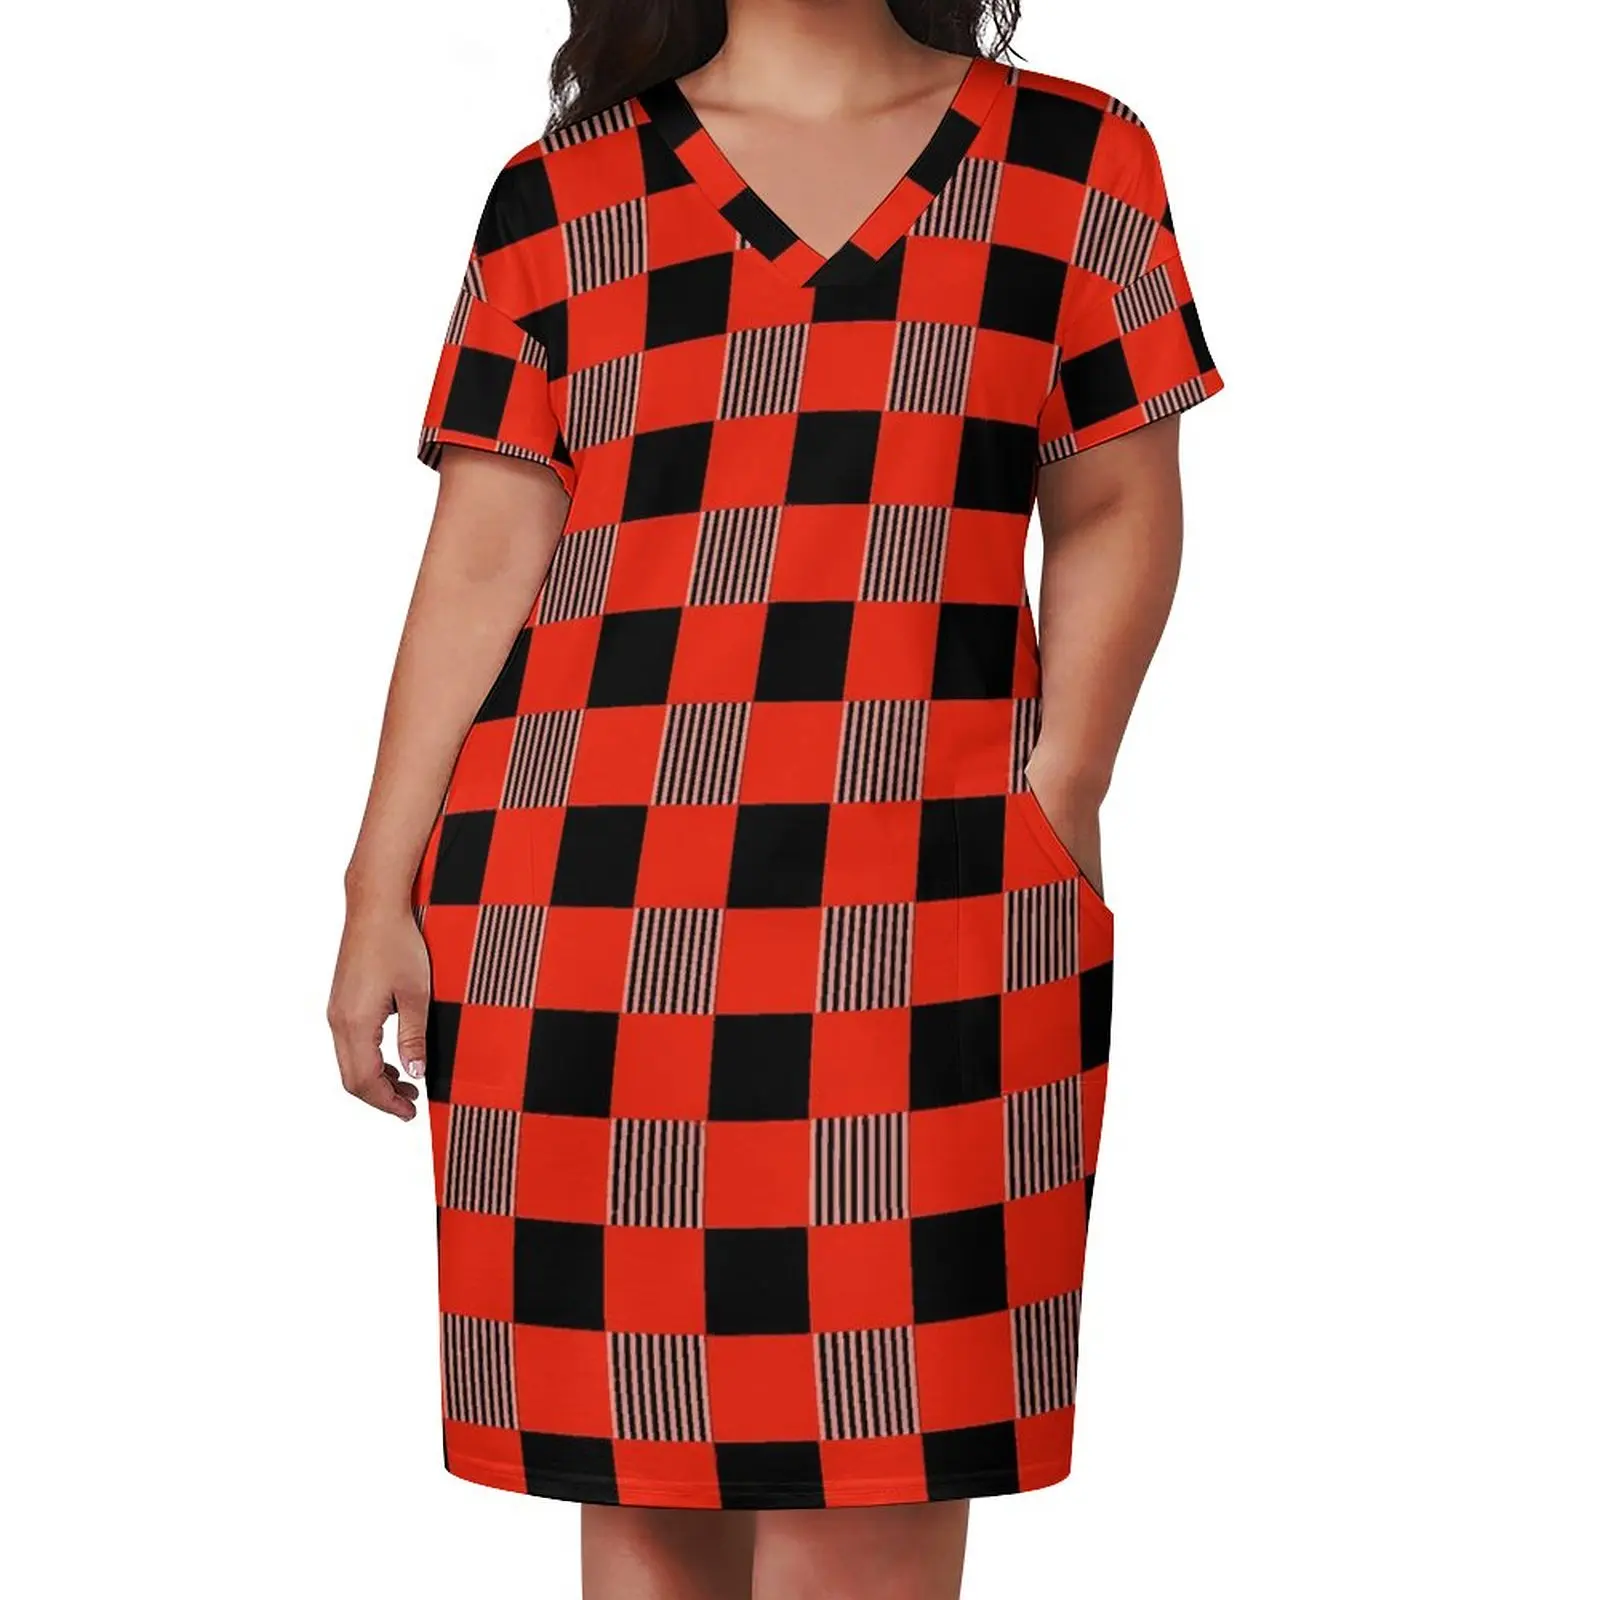 

Hard Gingham Casual Dress Summer Red And Black Stylish Dresses Female V Neck Printed Aesthetic Dress Big Size 3XL 4XL